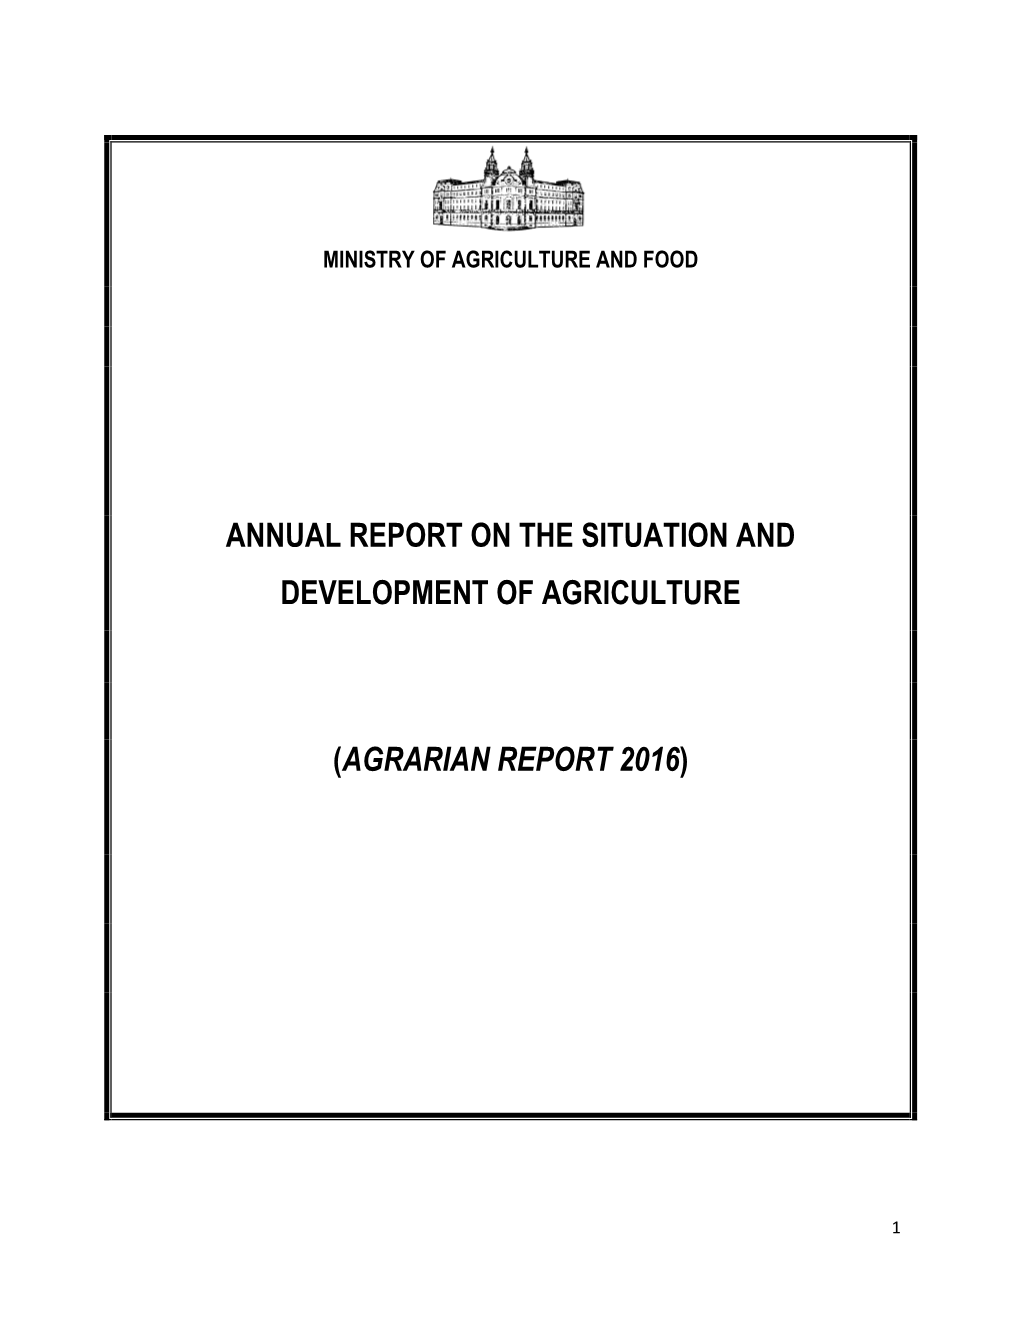 Agricultural Report 2016